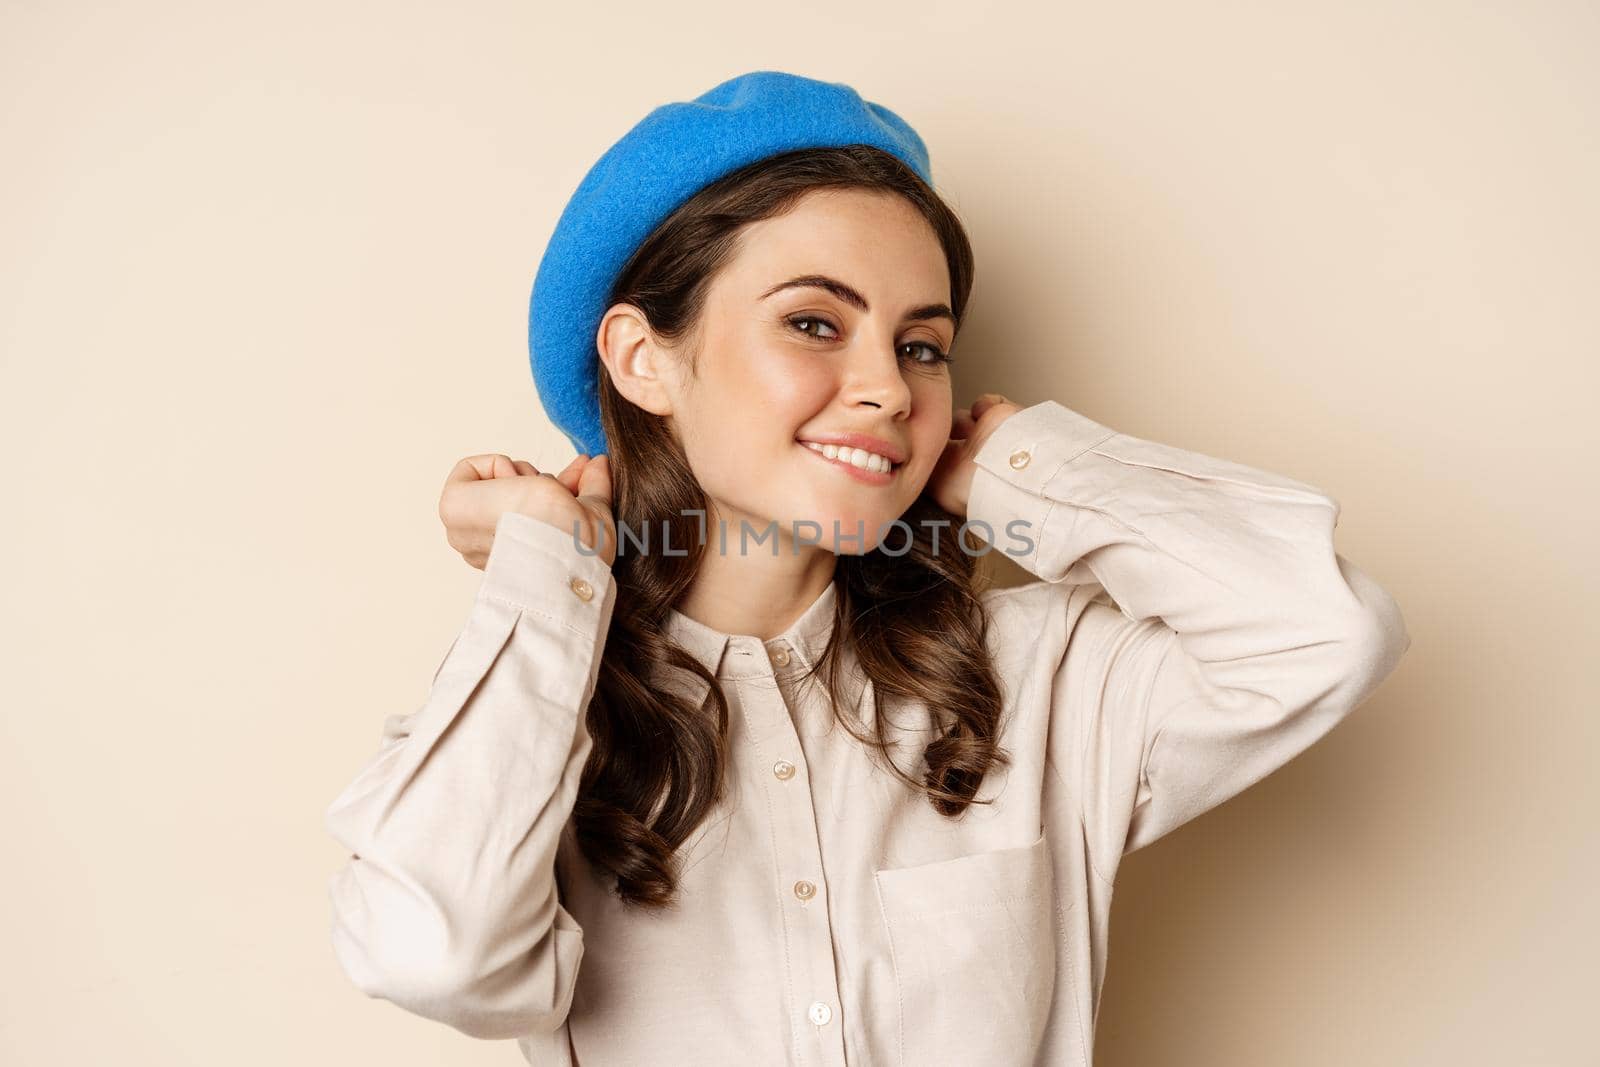 Stylish modern girl put on trendy hat on head and smiling, going out, posing against beige background.